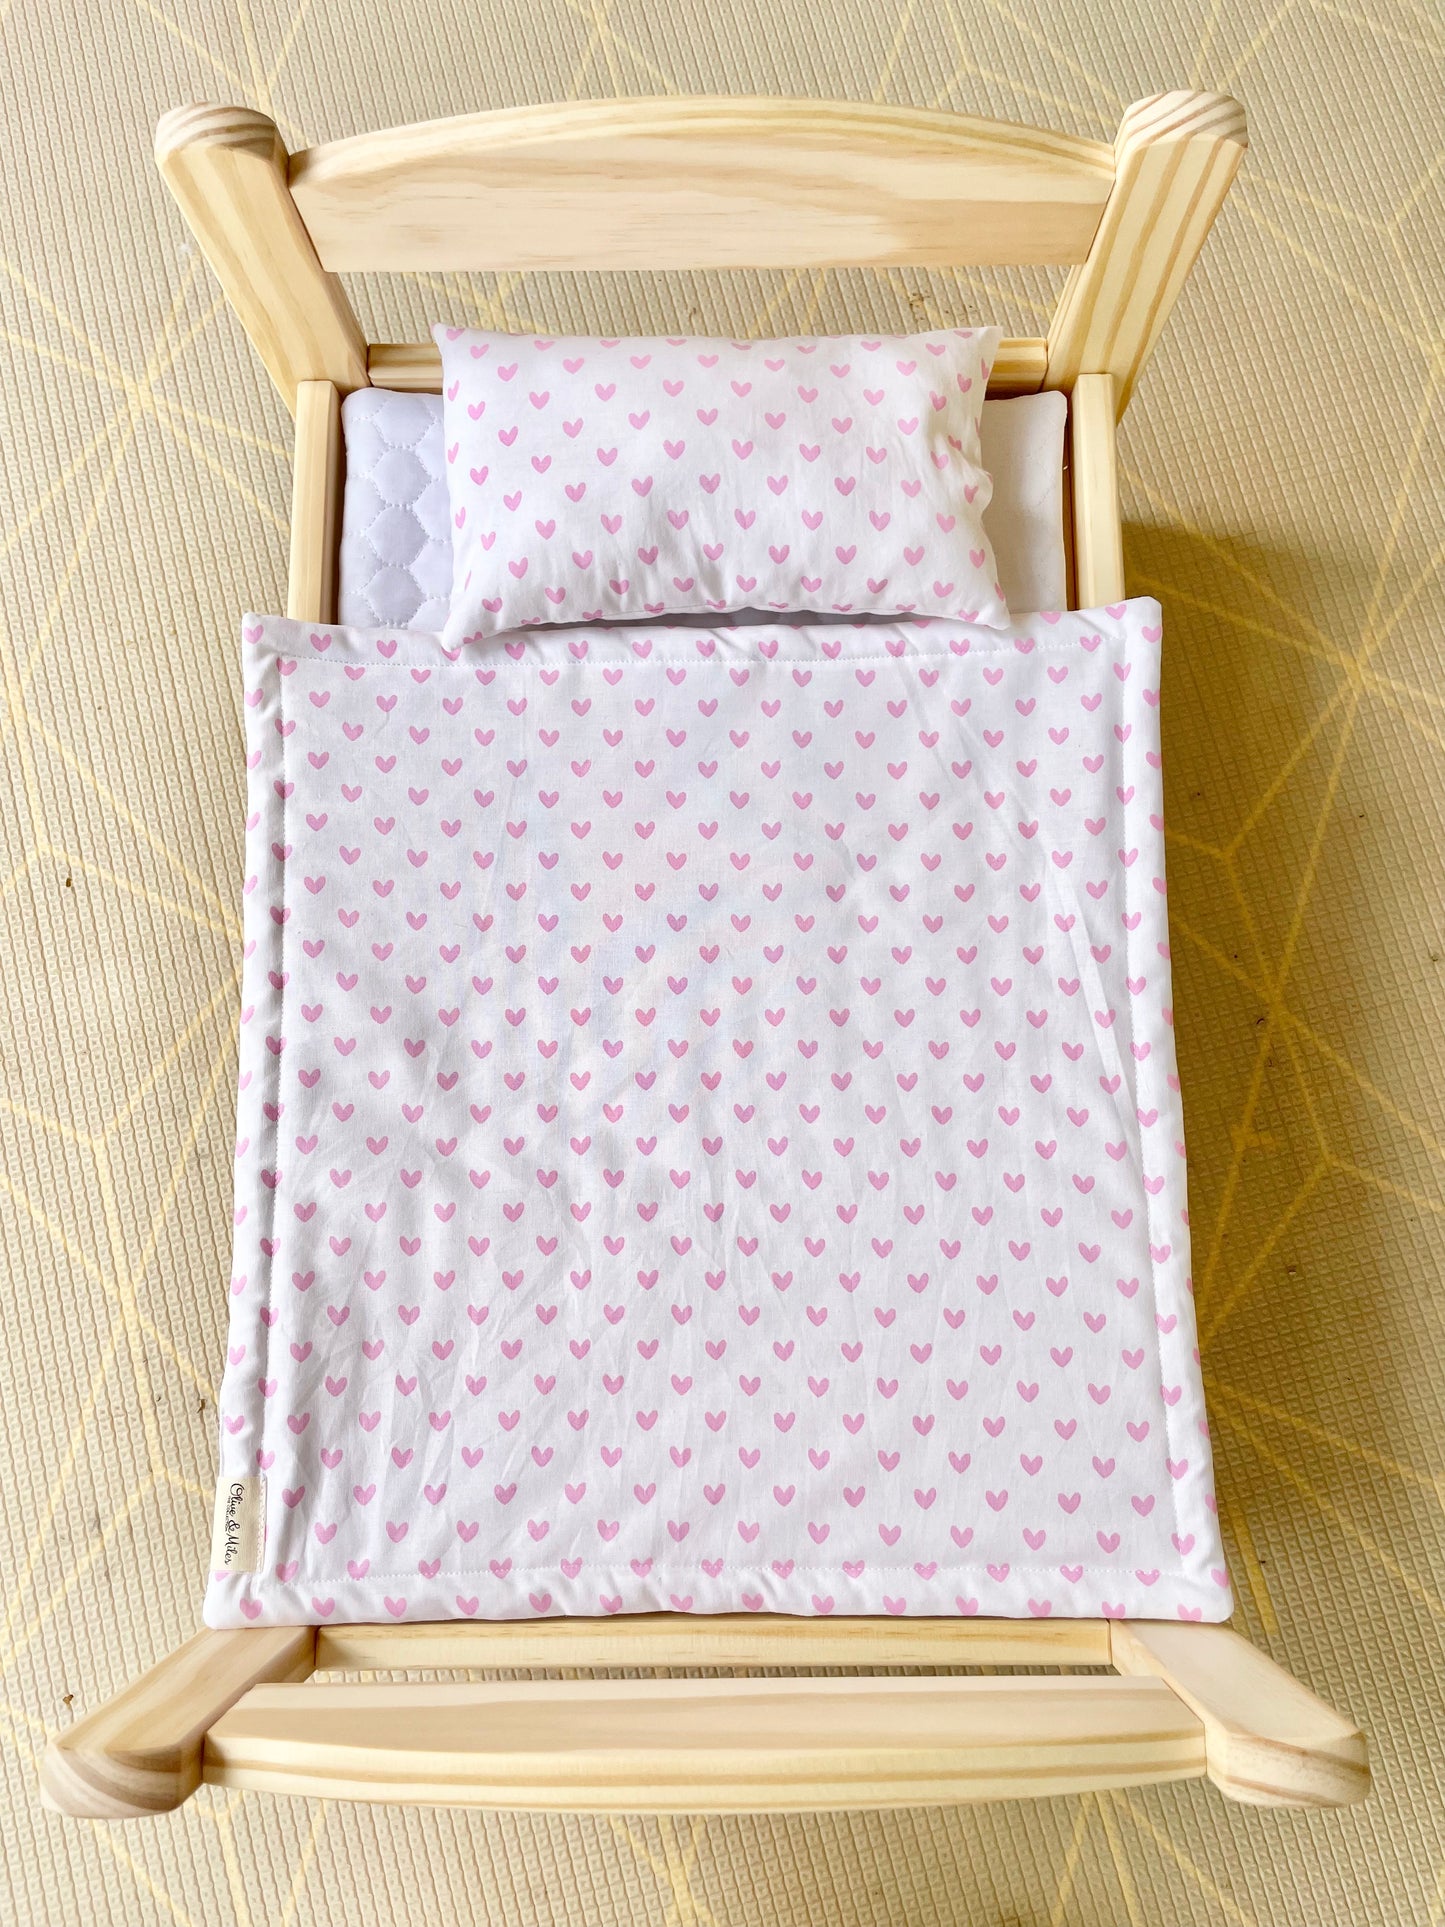 Hearts Doll Bedding